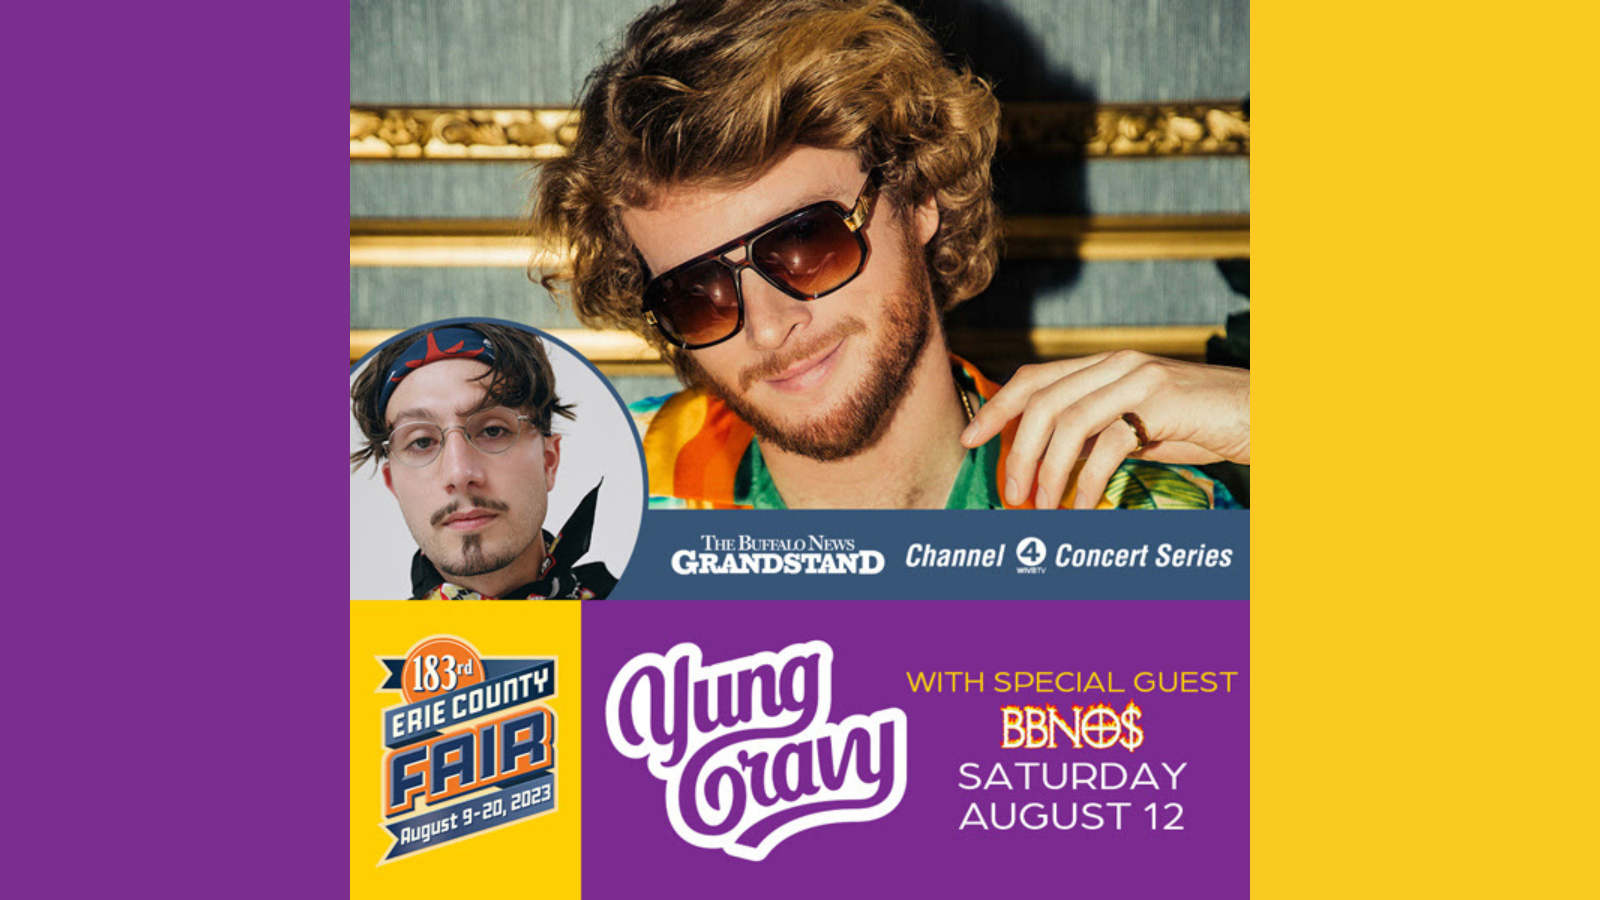 Erie County Fair adds Yung Gravy to concert lineup All WNY